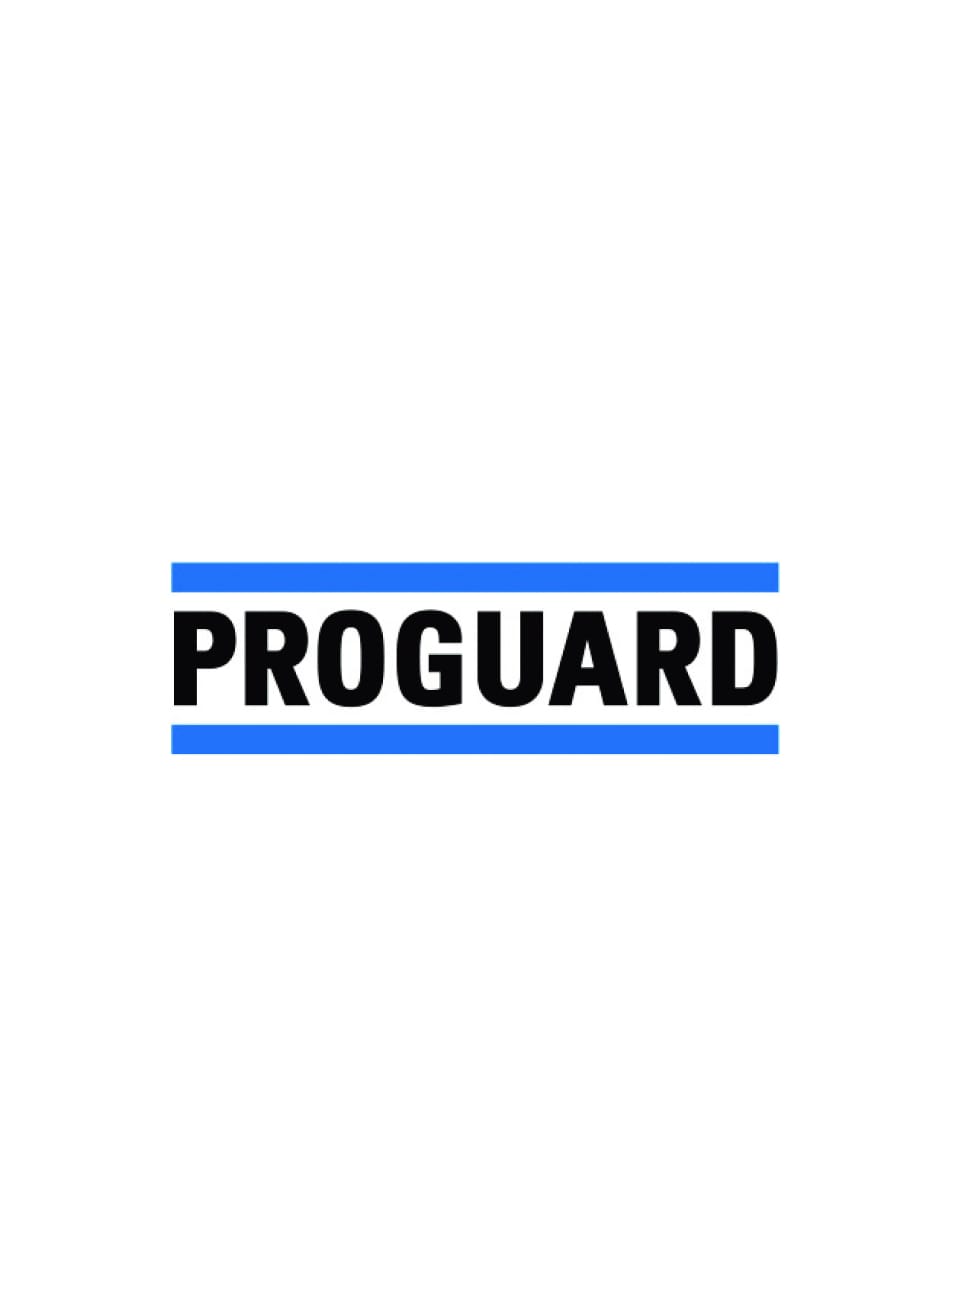 Launch of toilet with PROGUARD technology for maximum protection against hard water stains and spots.